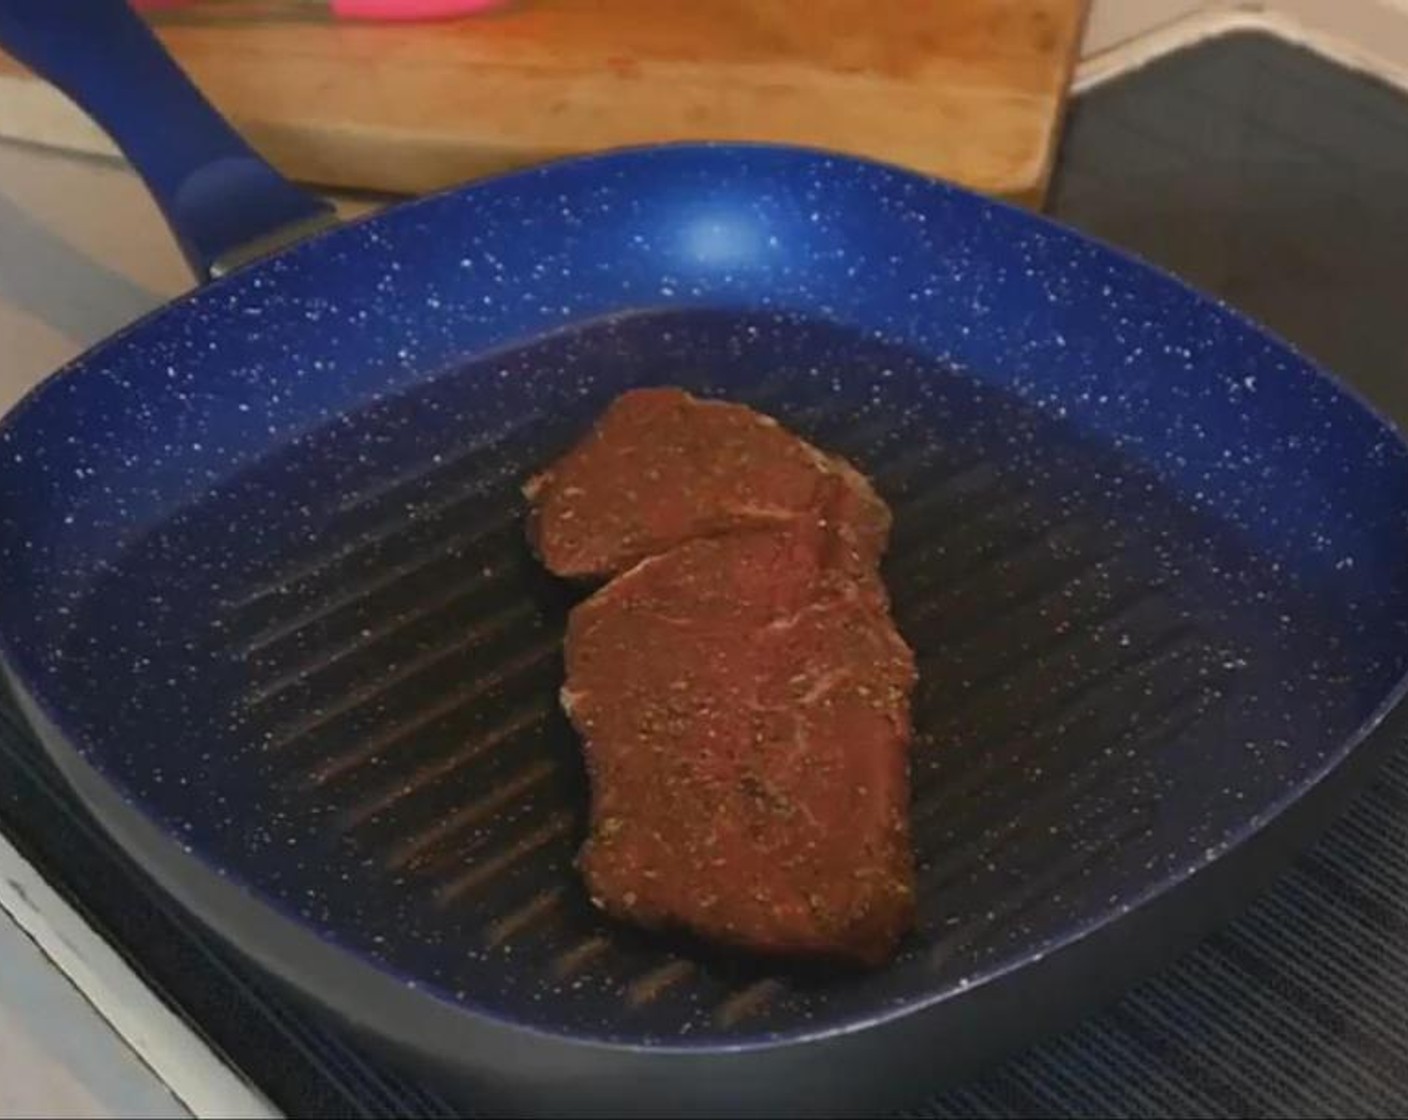 step 2 Cook the steak on a hot grill with some Extra-Virgin Olive Oil (as needed) on top, always remembering to remove the steak from the fridge at least 30 minutes before cooking so it is at room temperature. This will ensure the beef is soft and succulent after cooking.